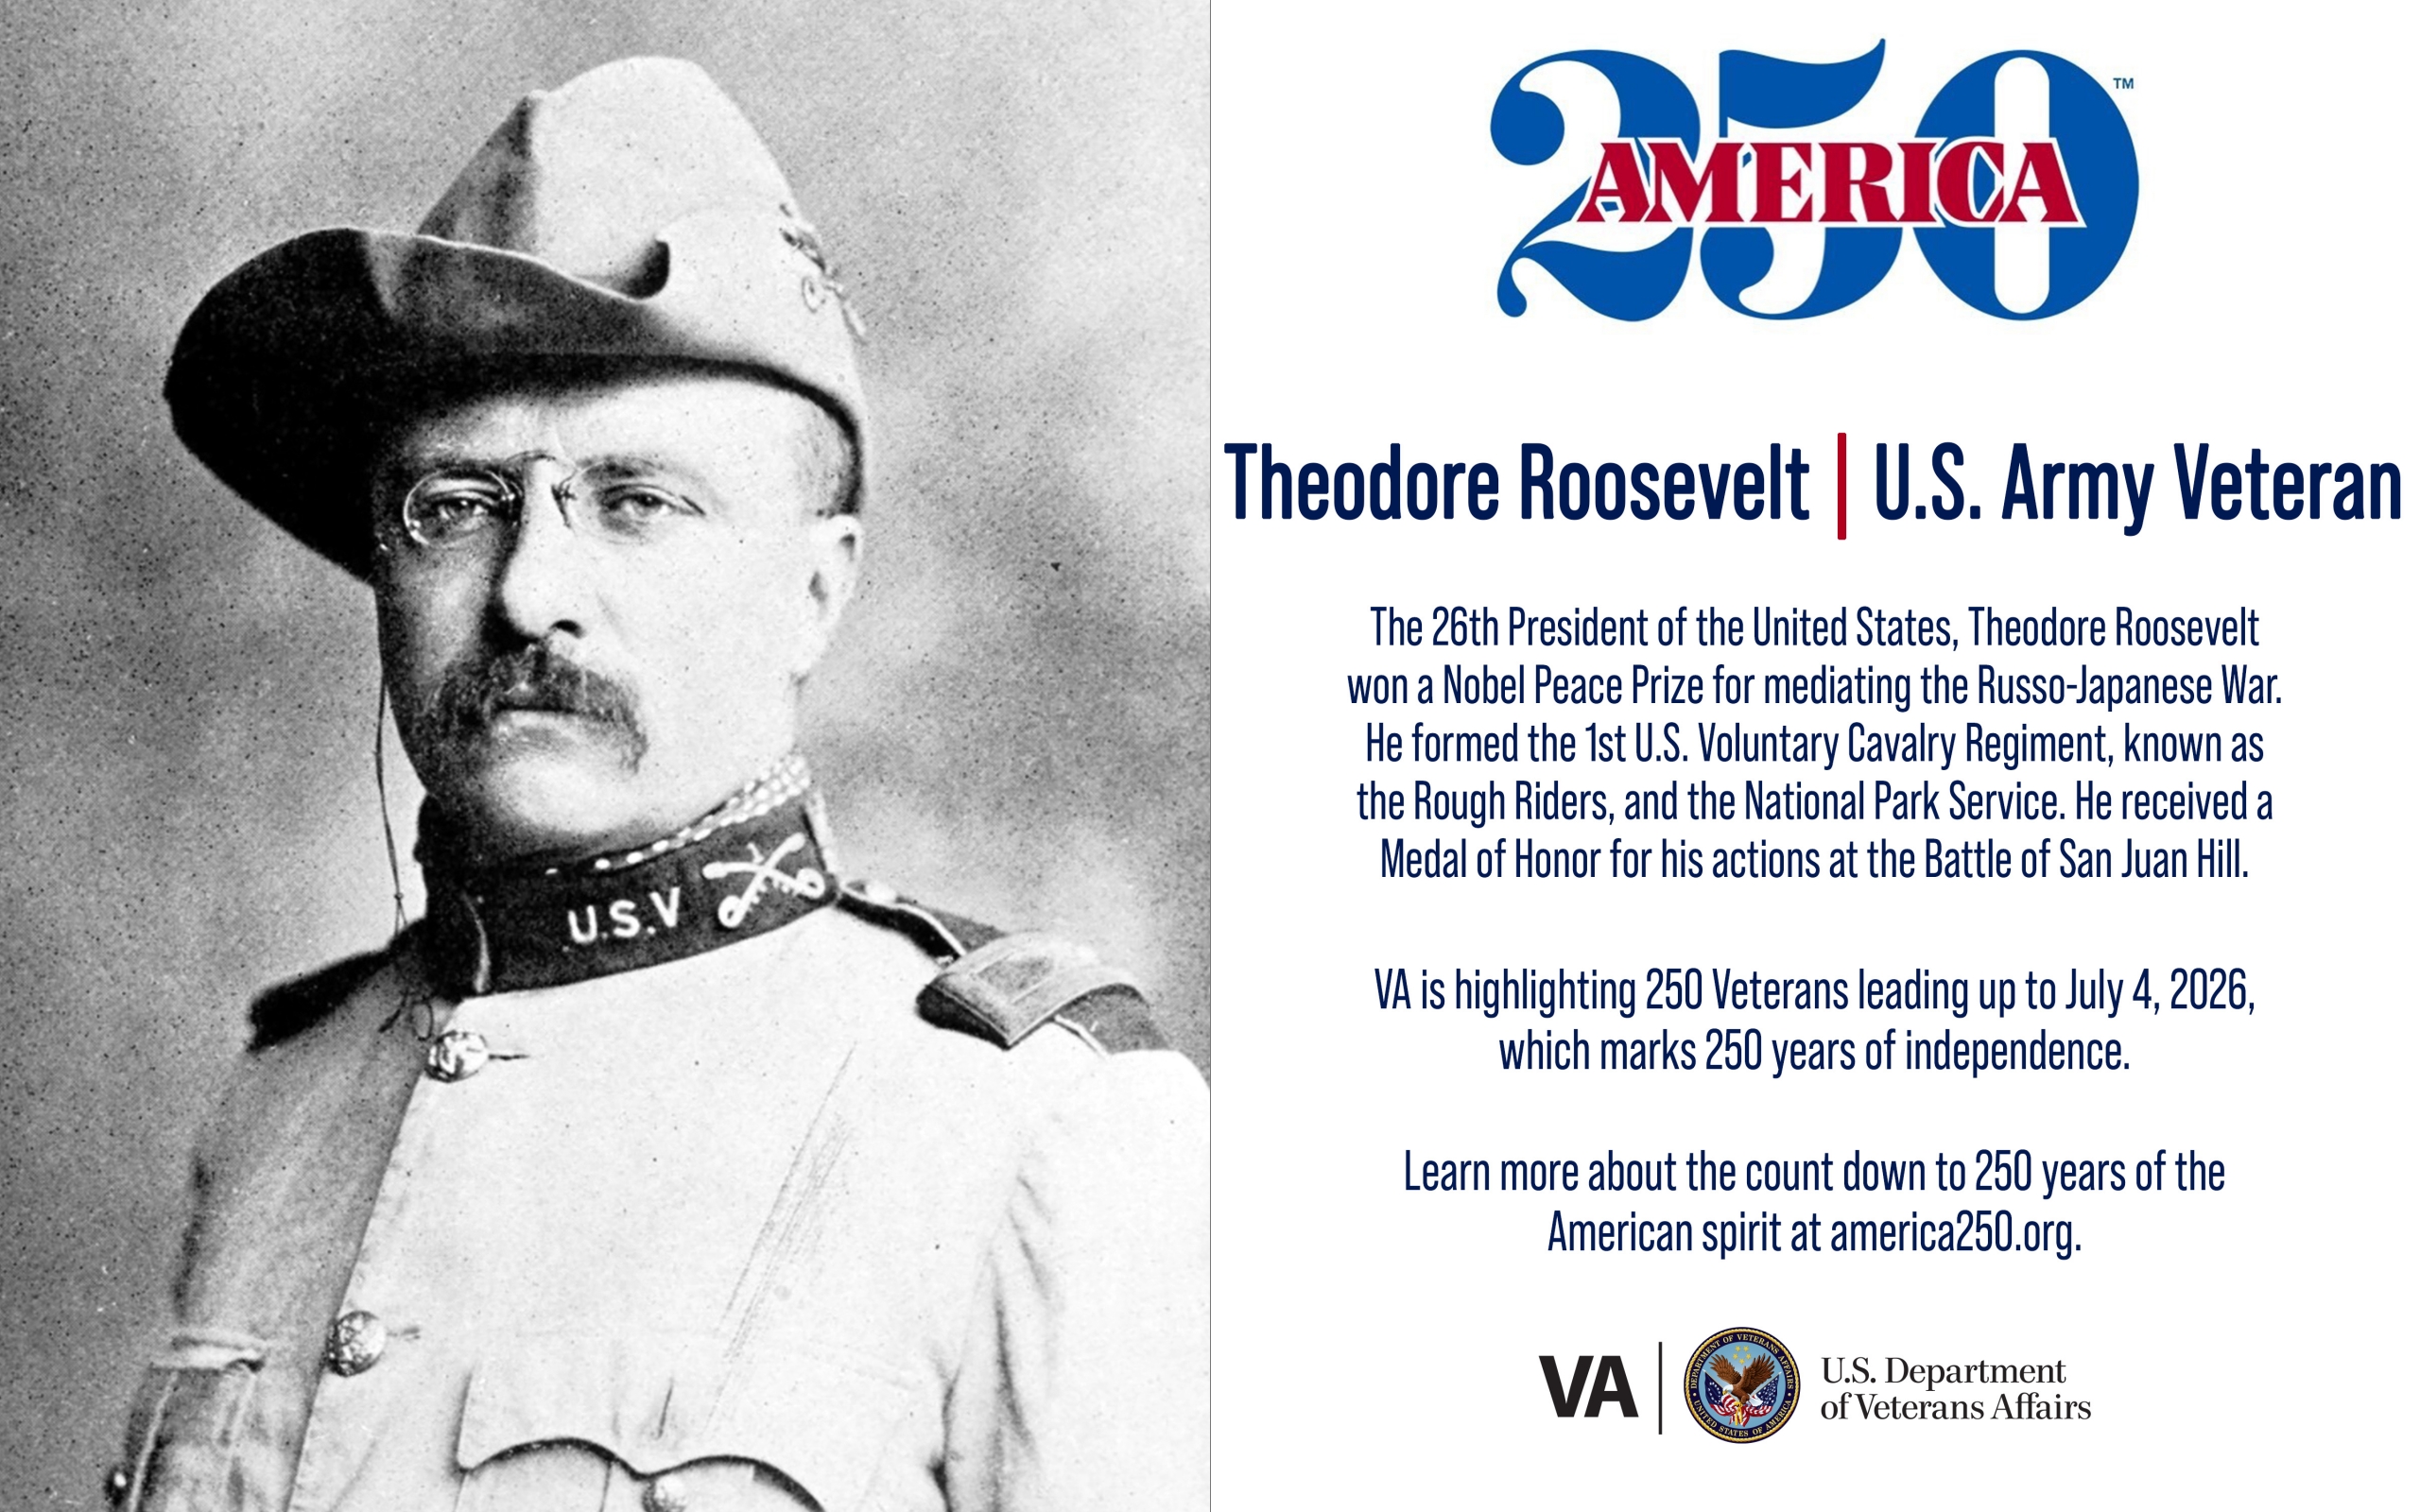 Today’s America250 salute is Army Veteran Theodore Roosevelt, a Medal of Honor and Nobel Peace Prize recipient and the 26th president.